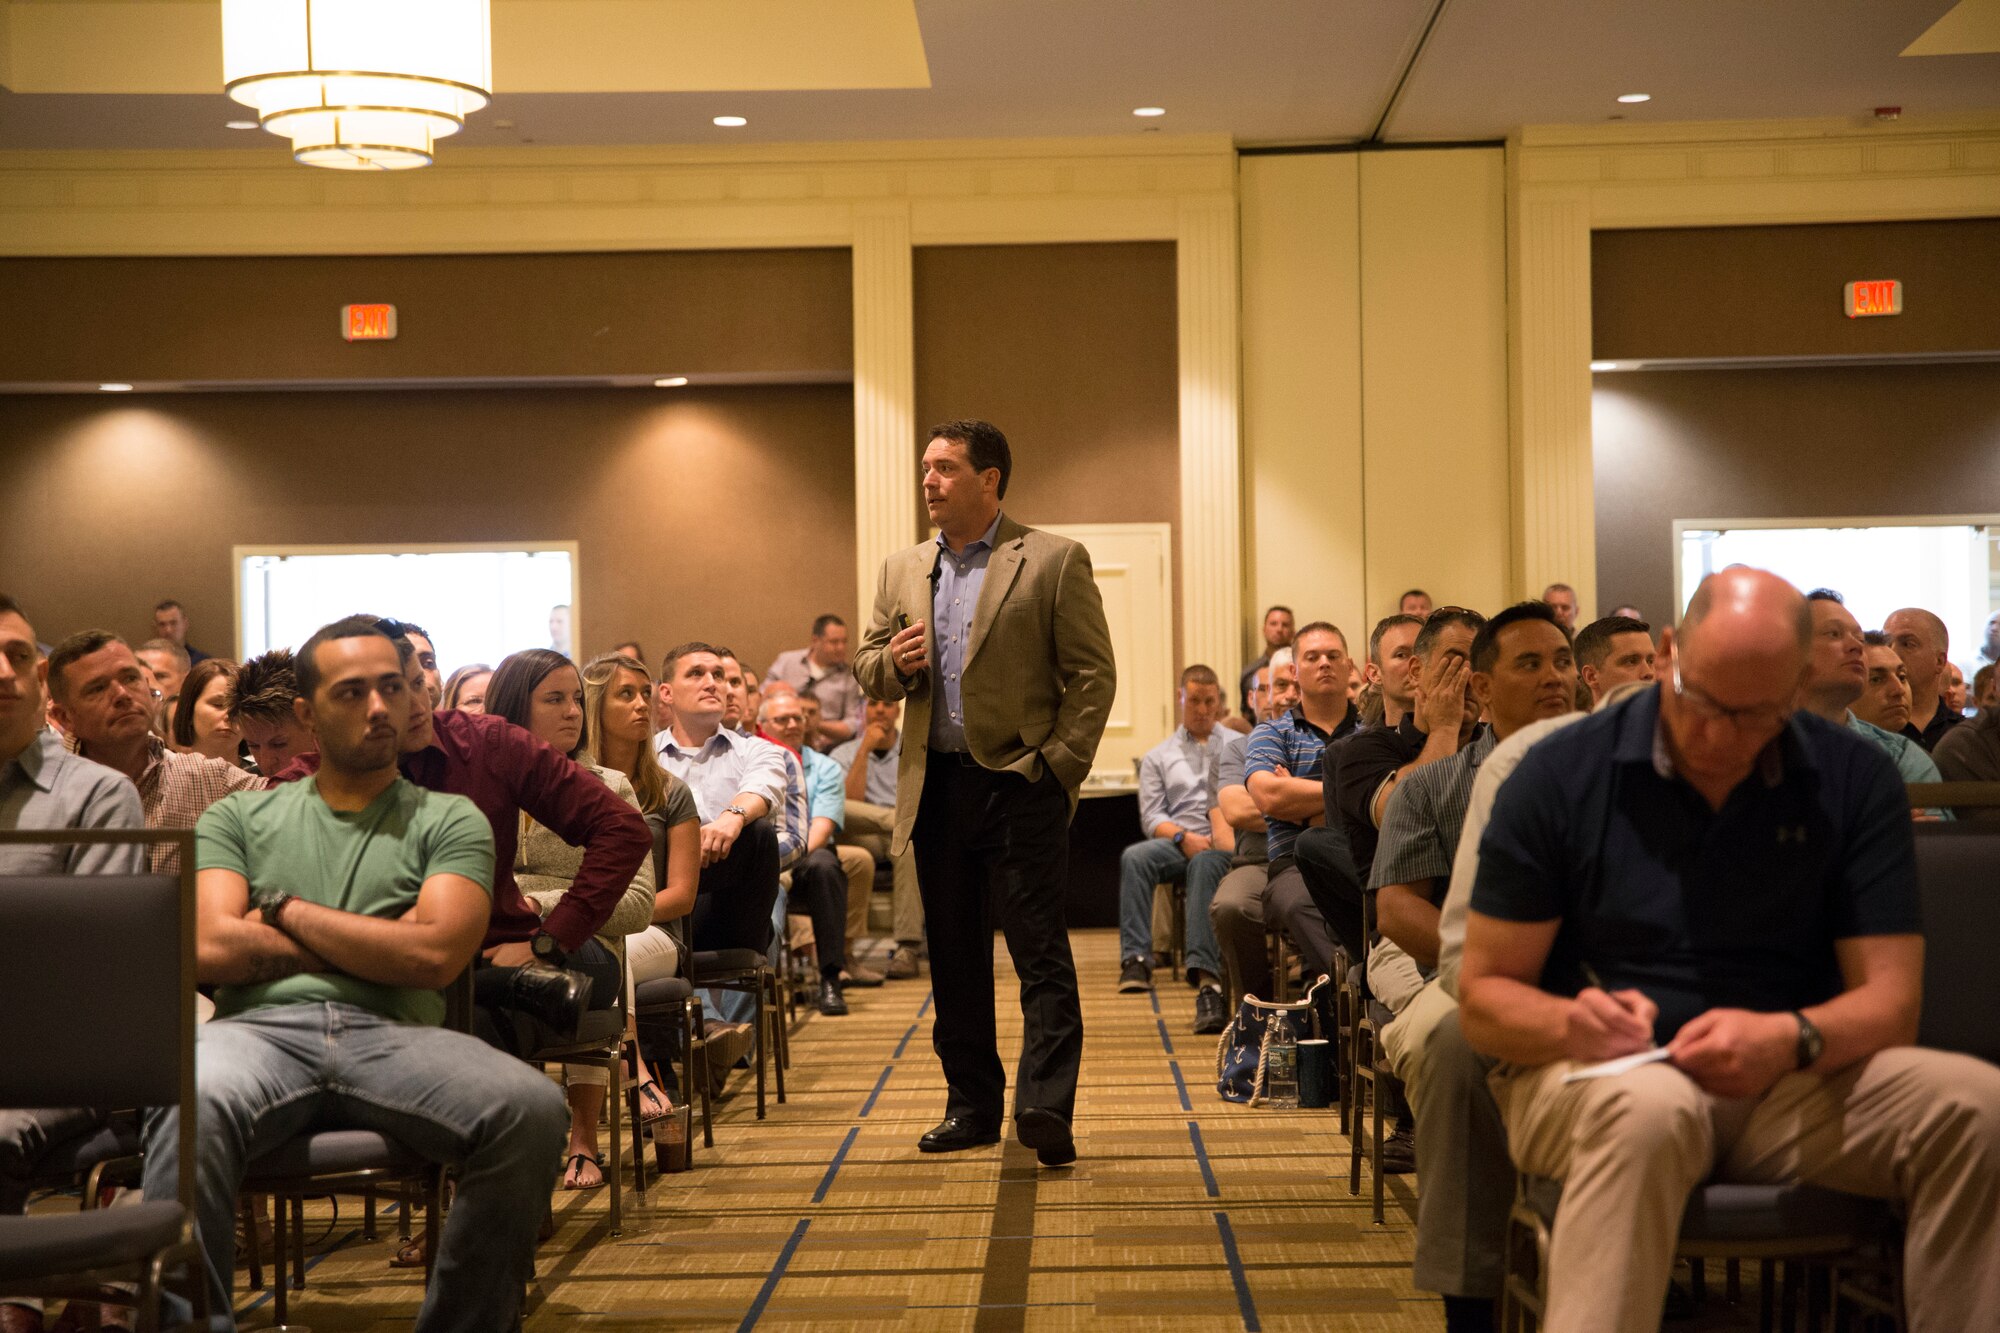 Doug Downey discusses human factors affecting safety to about 400 Airmen during the 109th Airlift Wing’s operational safety review day at the Saratoga Hilton in Saratoga, New York, on June 18, 2018.